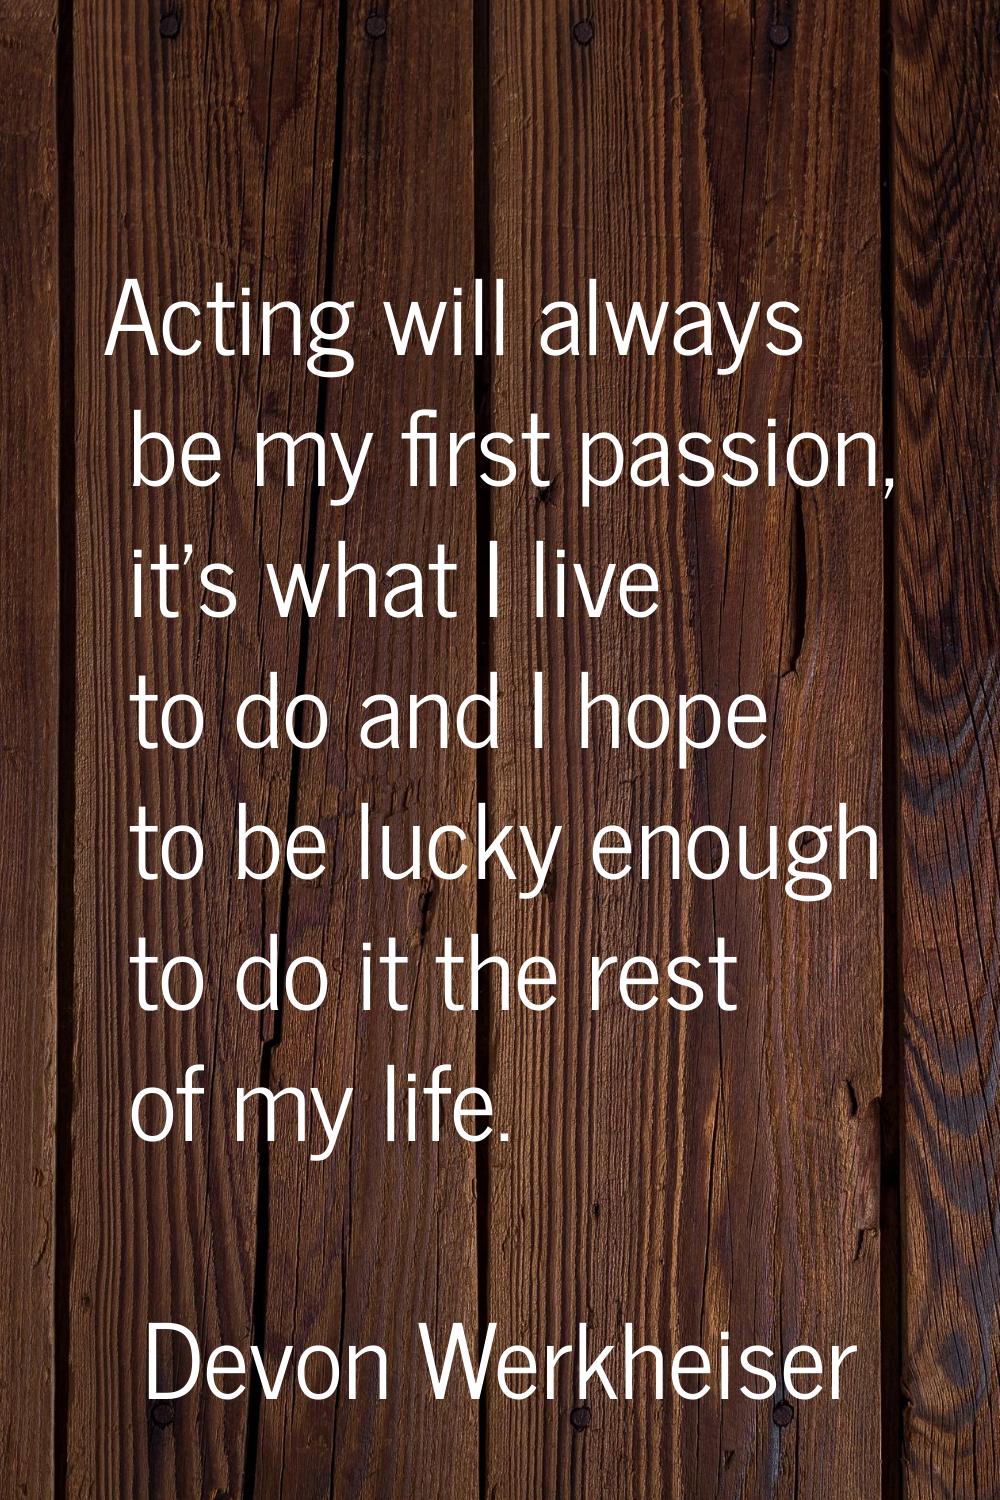 Acting will always be my first passion, it's what I live to do and I hope to be lucky enough to do 